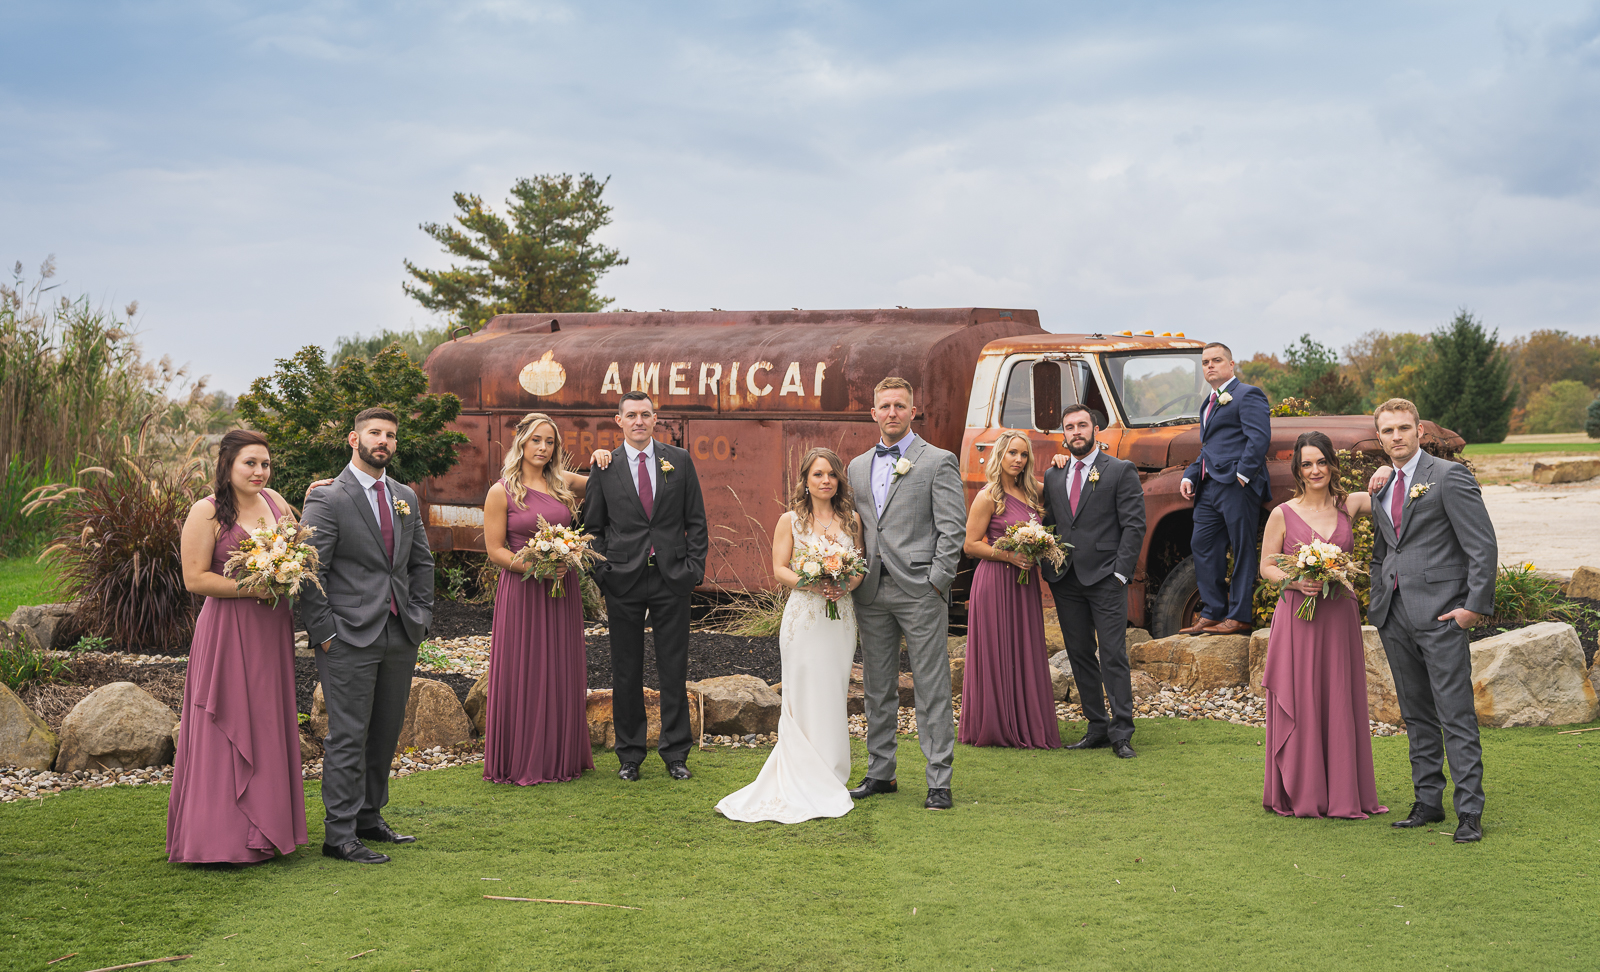 Bride and groom with bridal party, bridal party portrait, old truck, American oil, fall wedding, rustic outdoor wedding ceremony at White Birch Barn